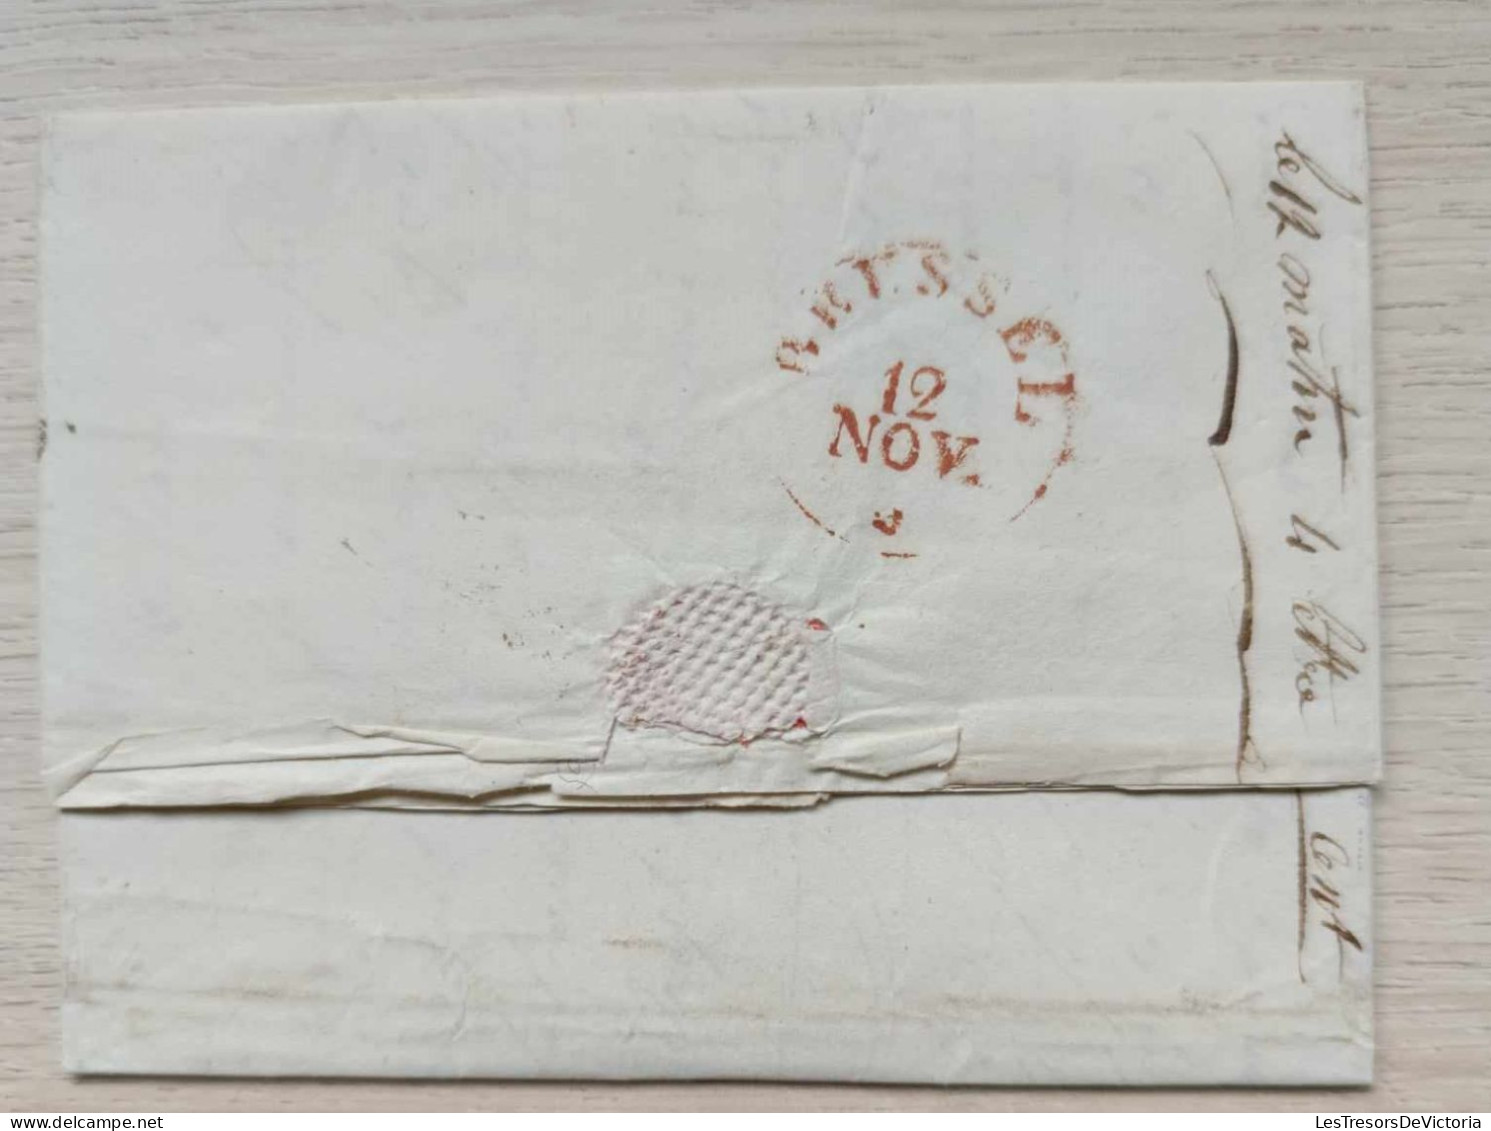 Belgique - Letter From Verviers Mailed On November 21st 1829 To Brussels - Weight 16ws Wigtjes - 1815-1830 (Dutch Period)